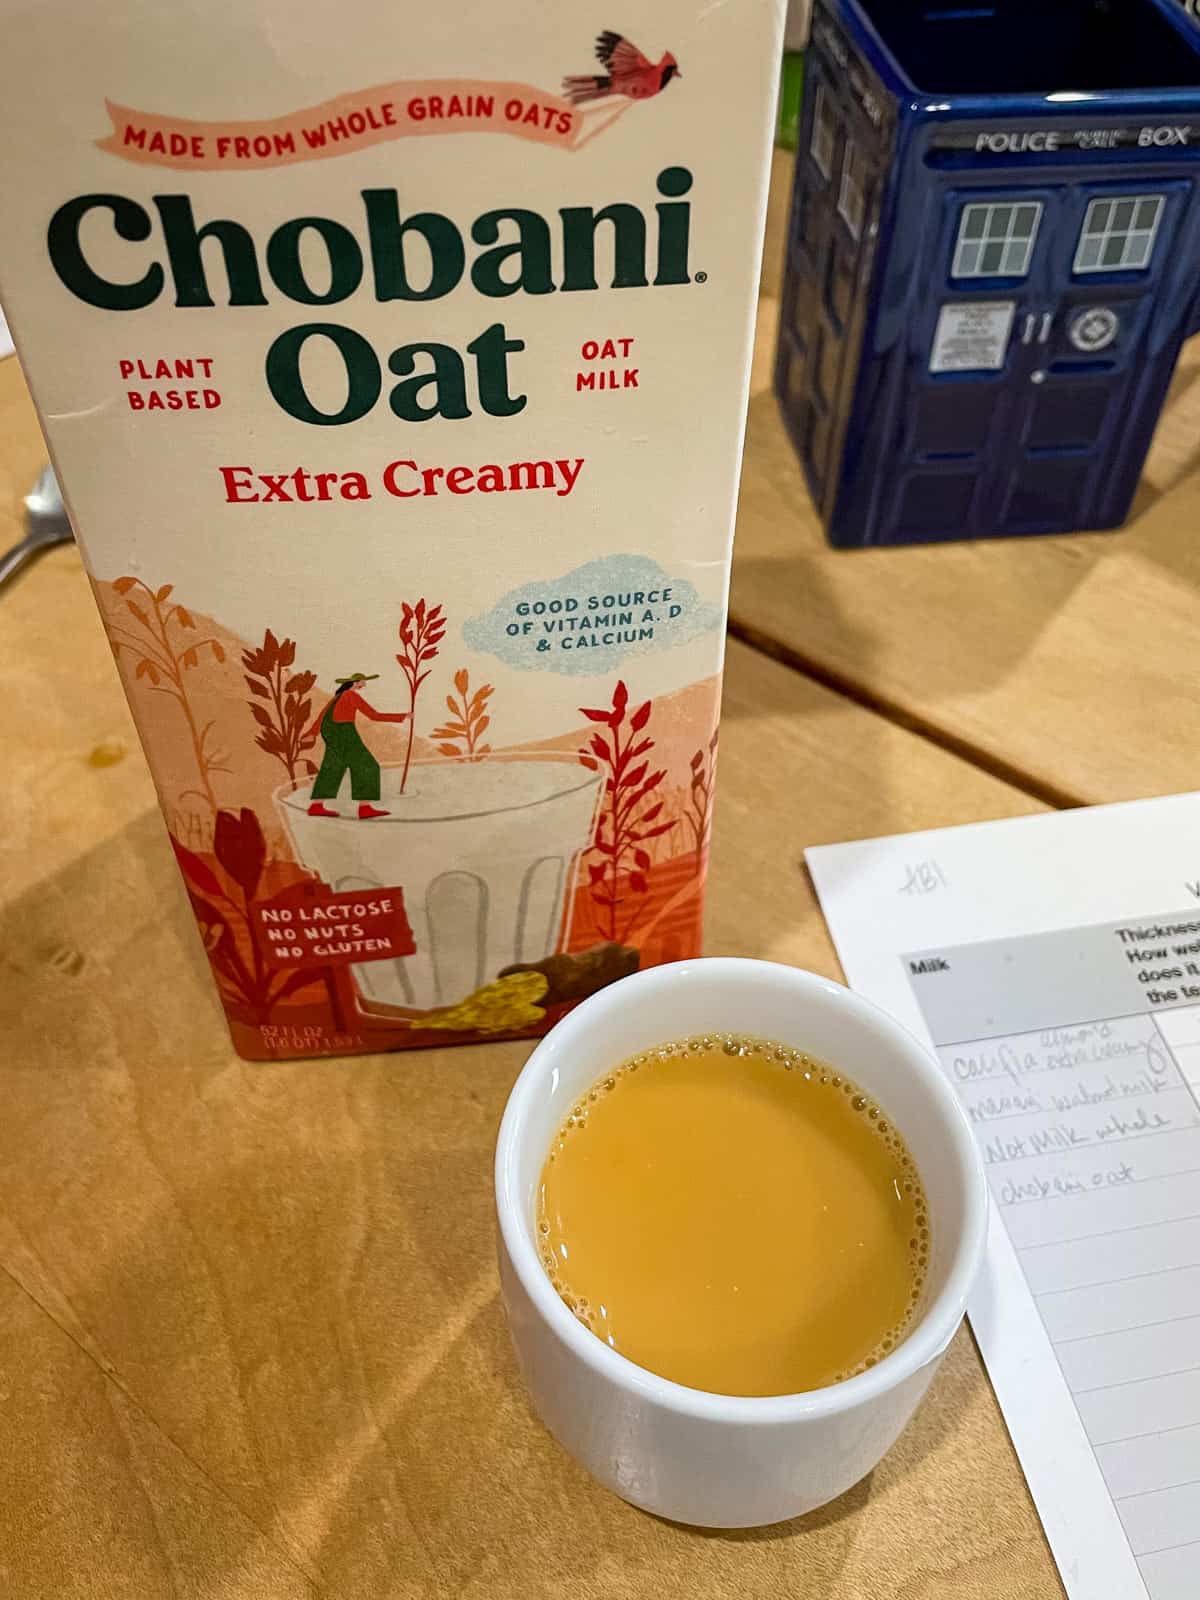 Chobani Oat Extra Creamy carton with cup of yorkshire gold black milk tea in front